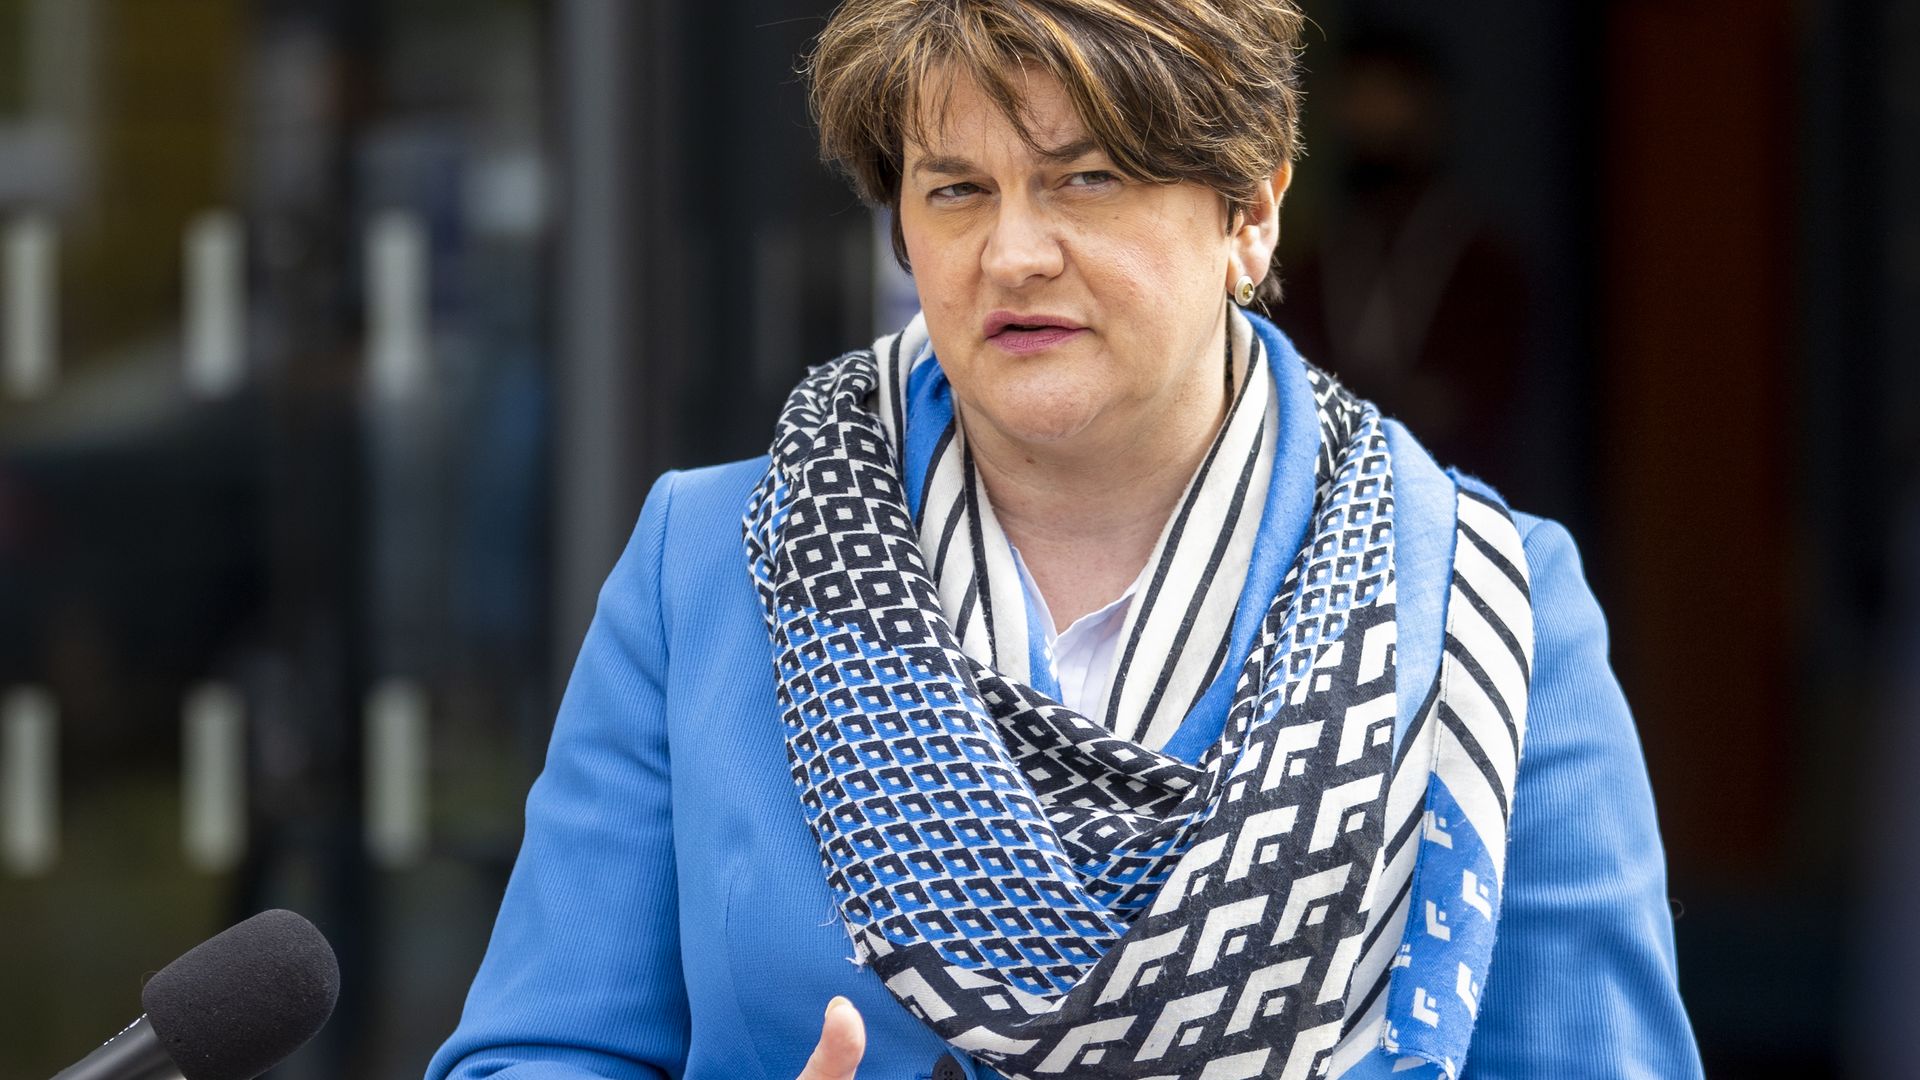 Northern Ireland's first minister Arlene Foster answers questions on her leadership during a visit to the Hammer Youth Centre, in Belfast - Credit: PA